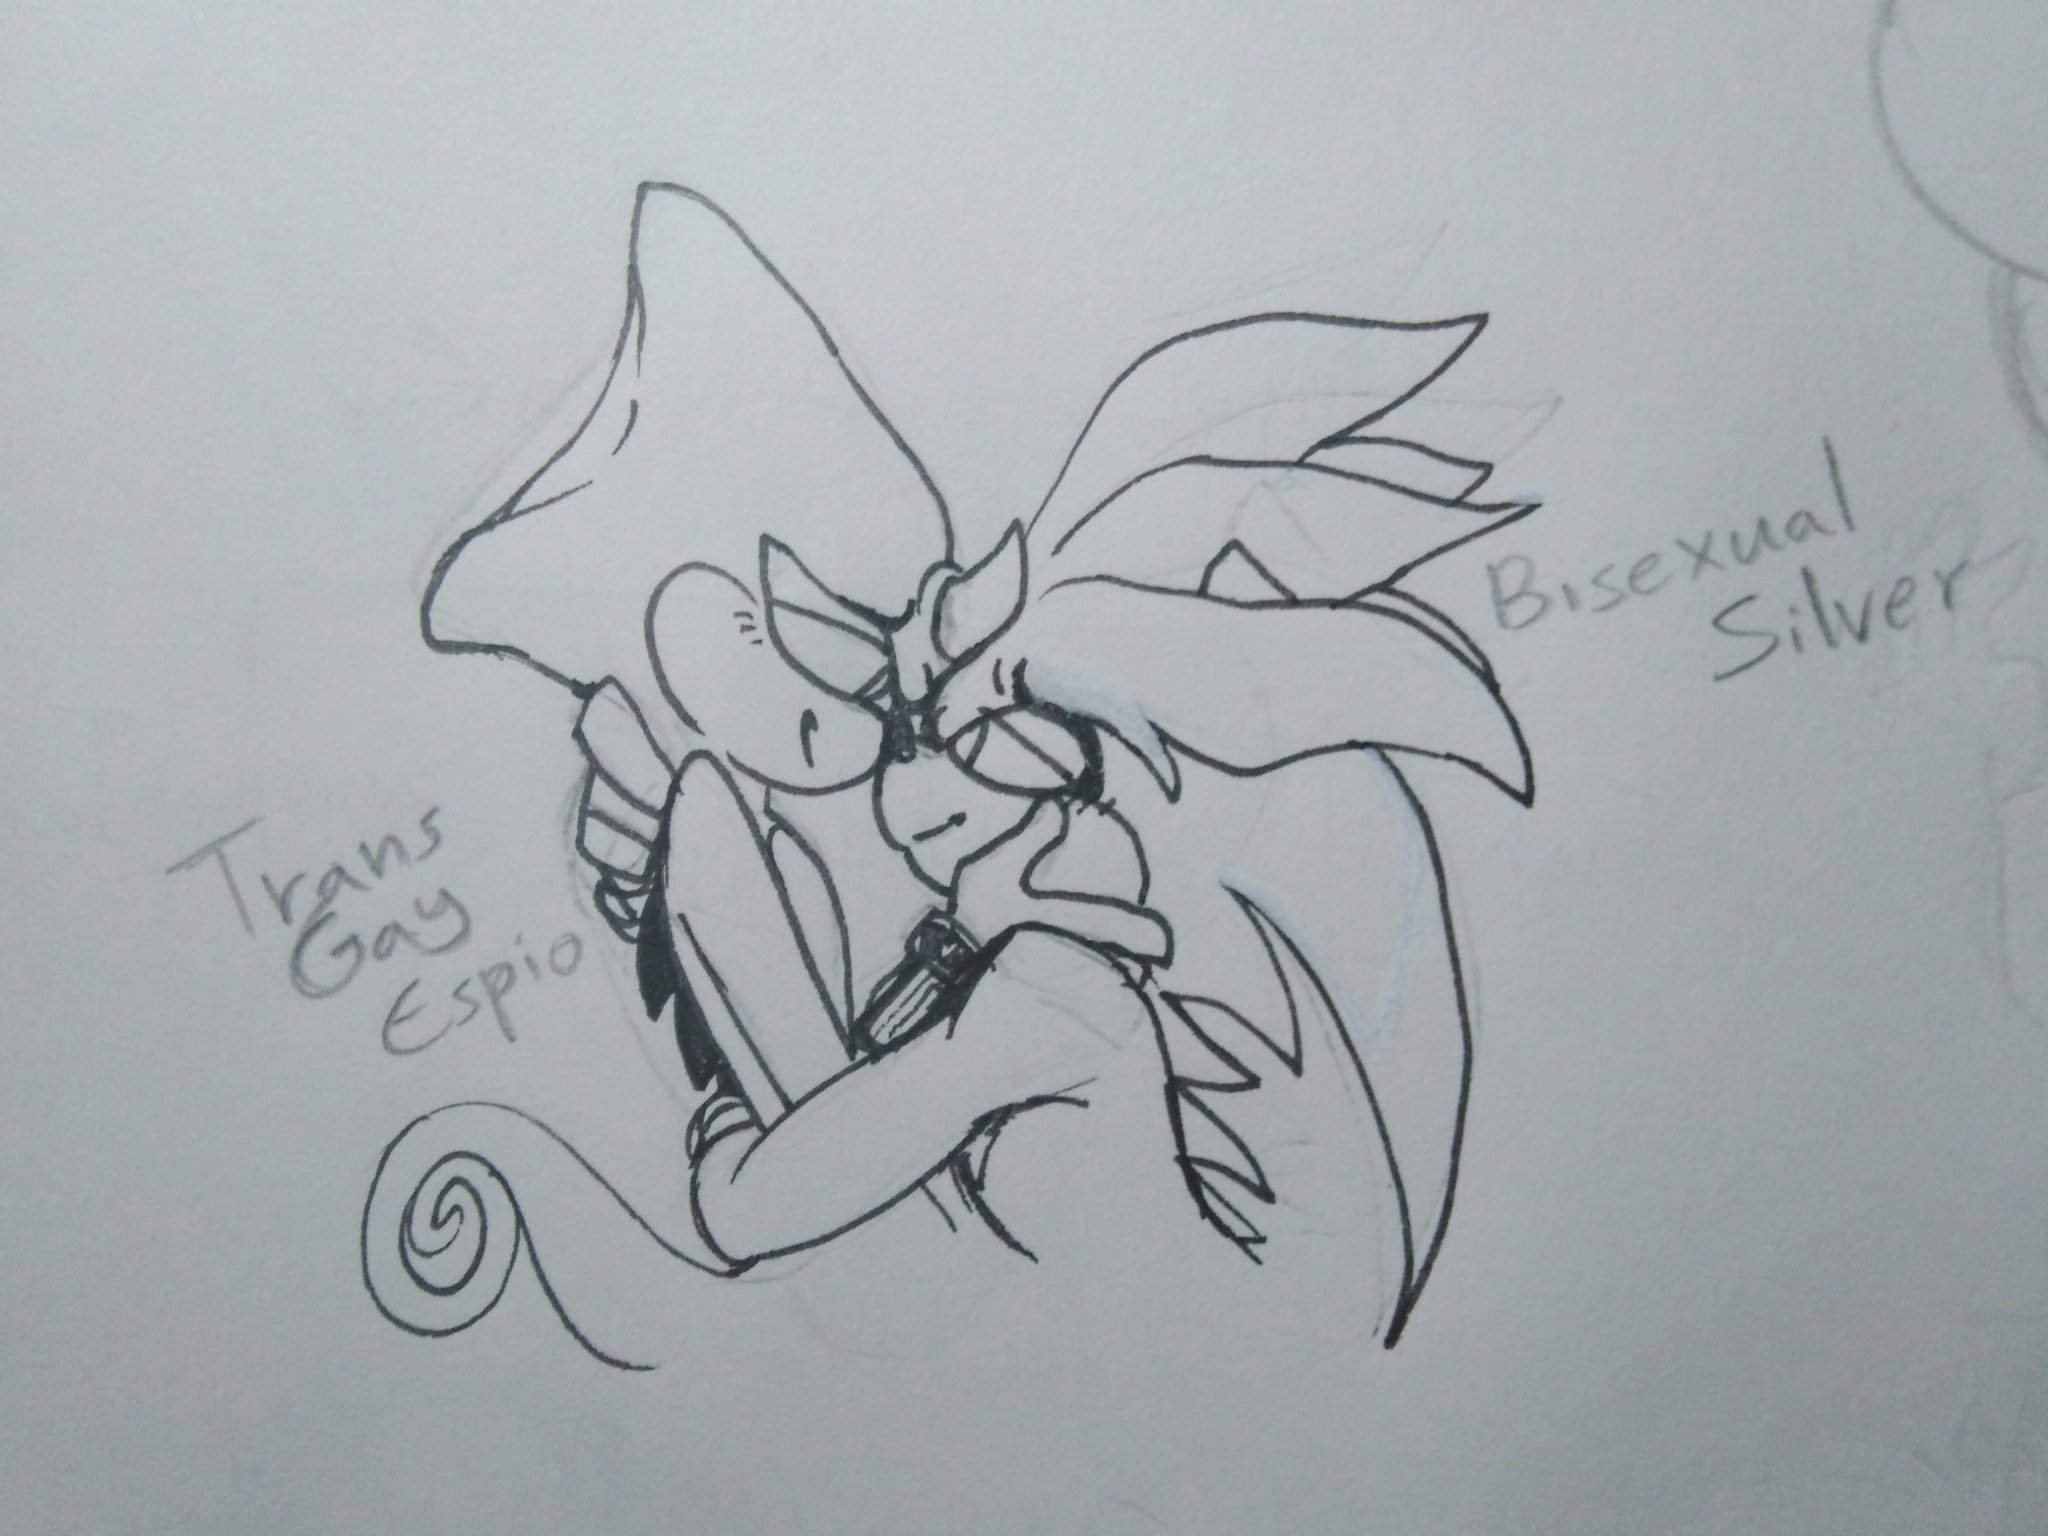 Espio x Silver (idk what their ship name is called-) Sonic the Hedgehog! 